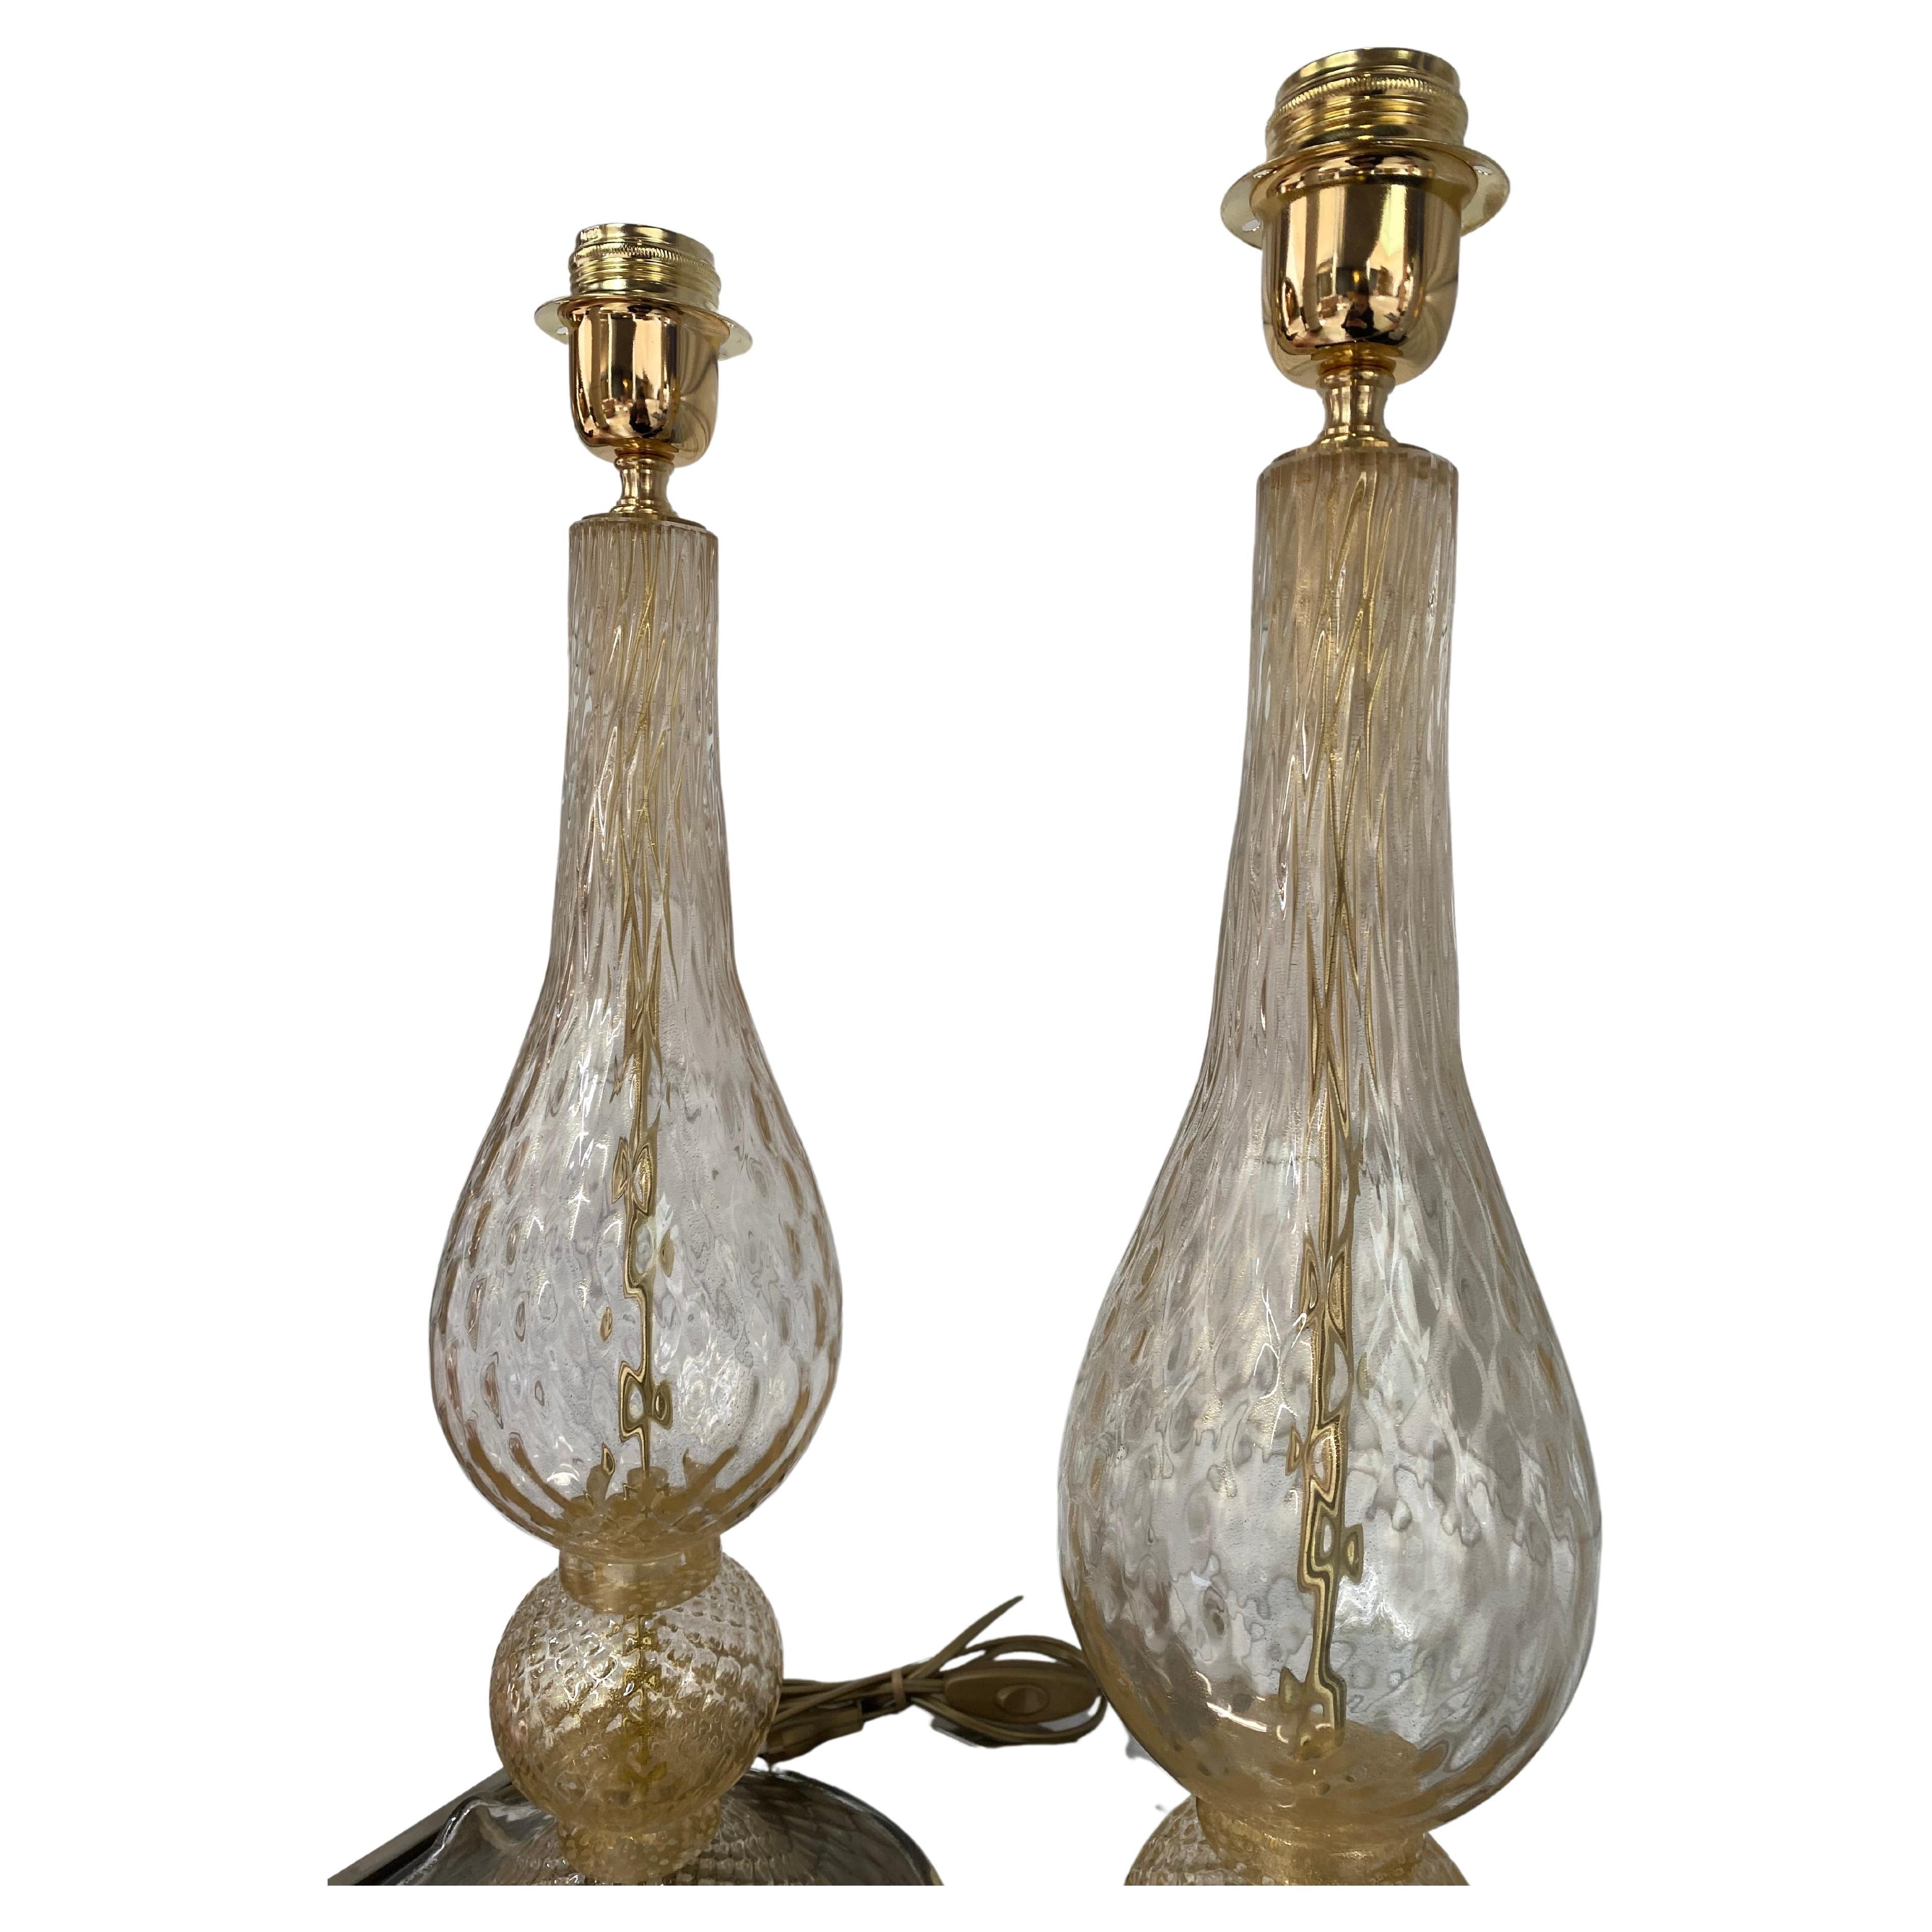 Pair of golden lamps Alberto Dona Murano (11 and 12)
Circa 1970
Signed on the foot 
Dimensions : h52x20cm

Price : 3500 € for the pair.